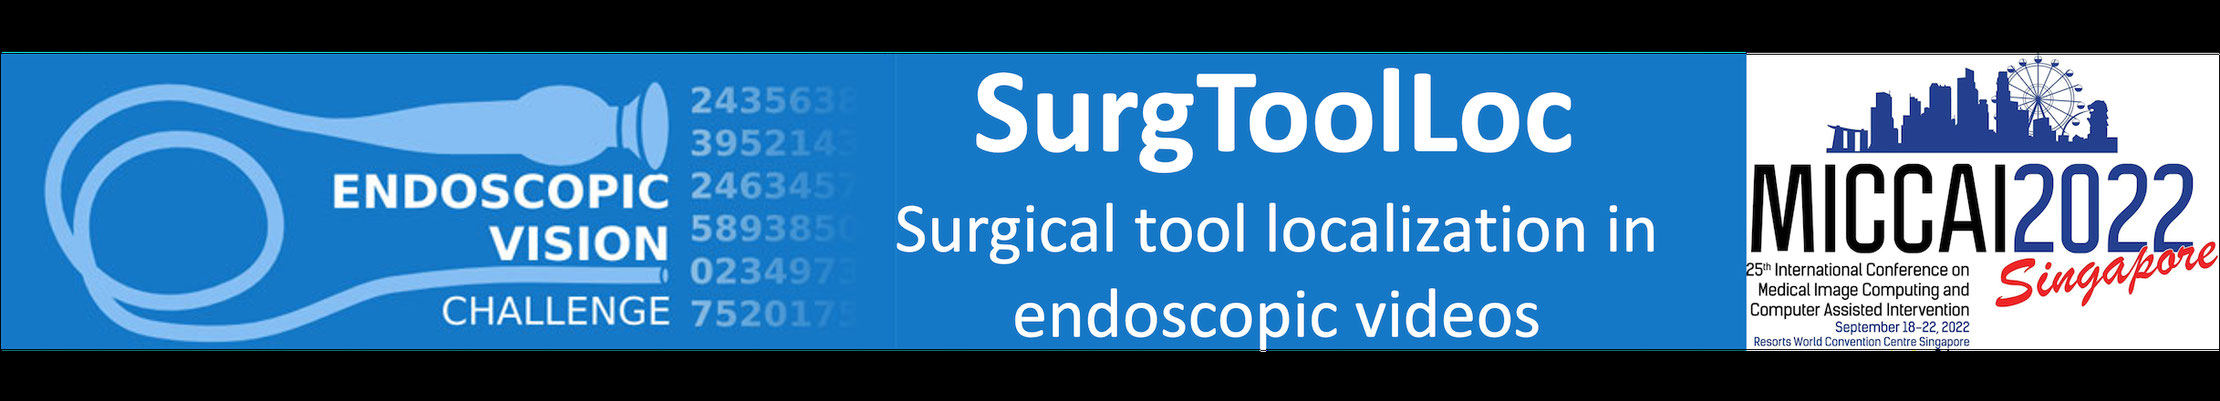 Surgical Tool Localization in endoscopic videos Banner